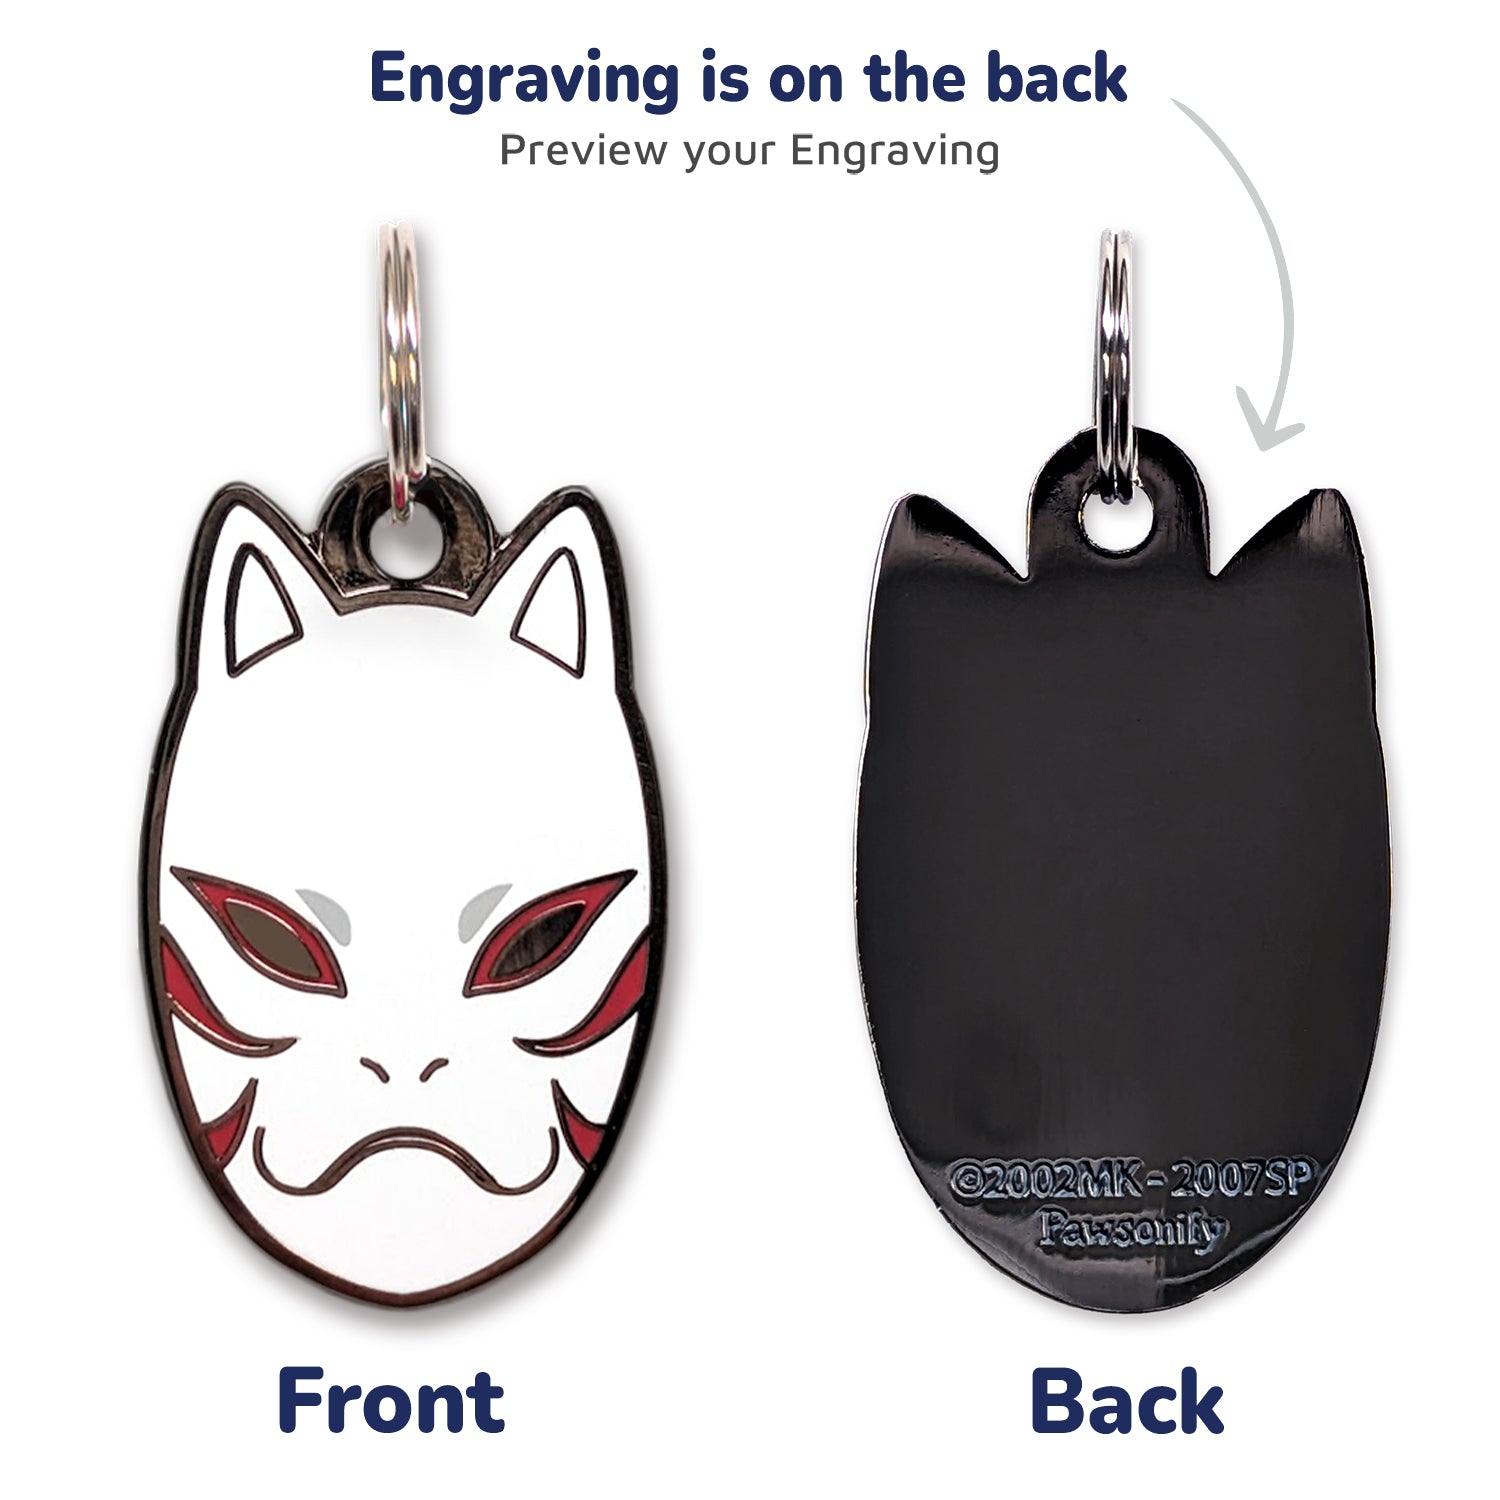 Naruto Shippuden x Pawsonify - Officially Licensed Ninja Anbu Kakashi Pet Tag with FREE ENGRAVING! Engraving Preview